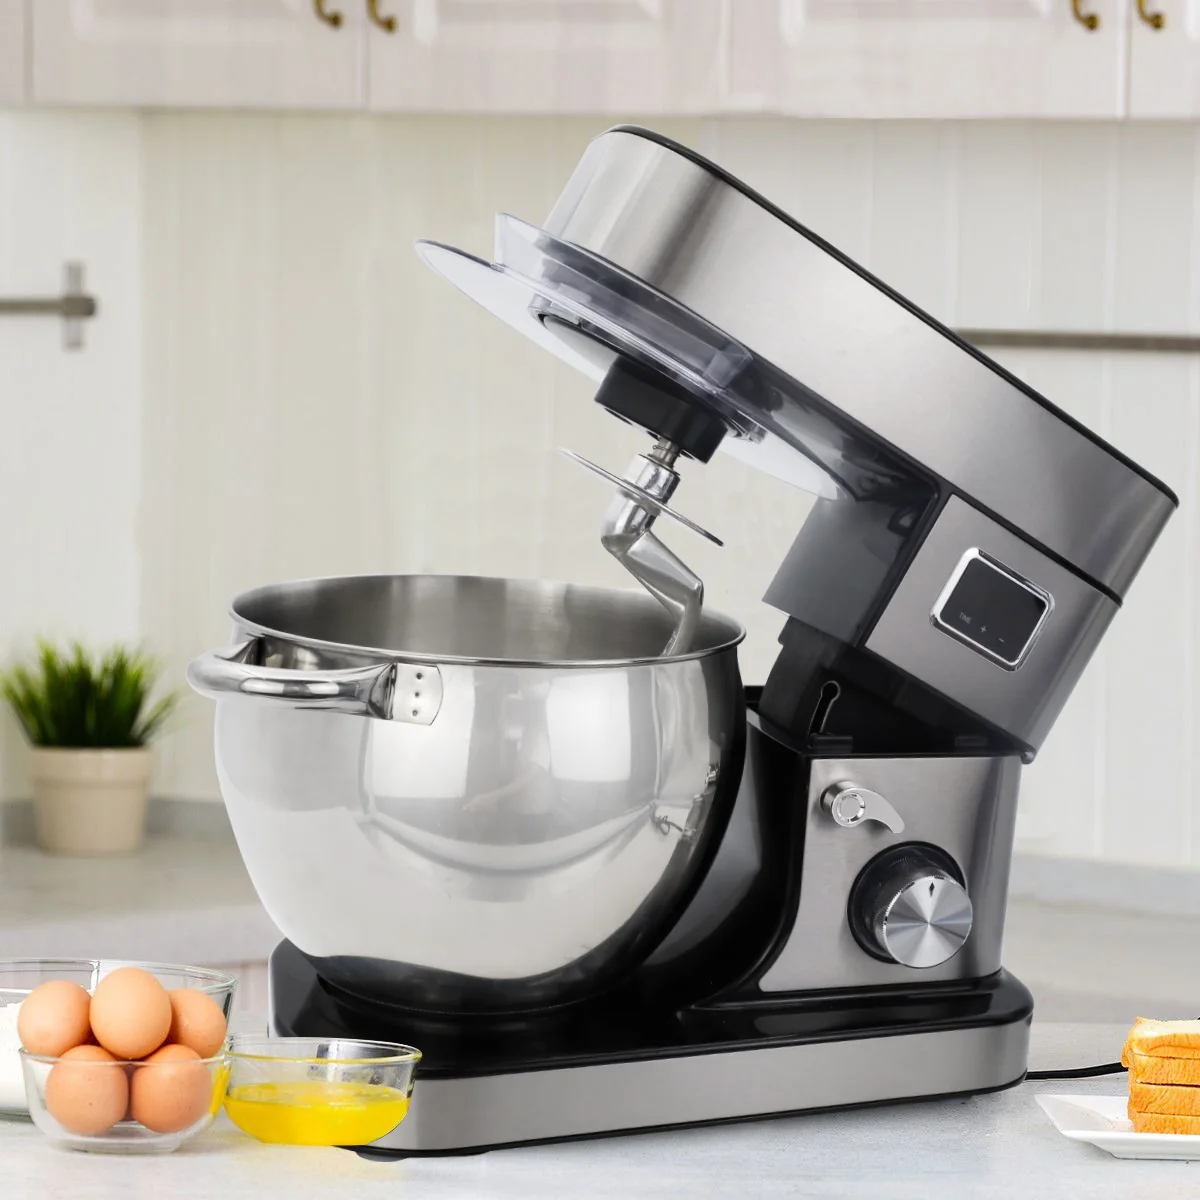 boiler droom Zenuw Source Good quality cheap Professional Cake Food Mixer Bread 2000W 9L  Planetary Kitchen Robot Dough Stand Mixer on m.alibaba.com